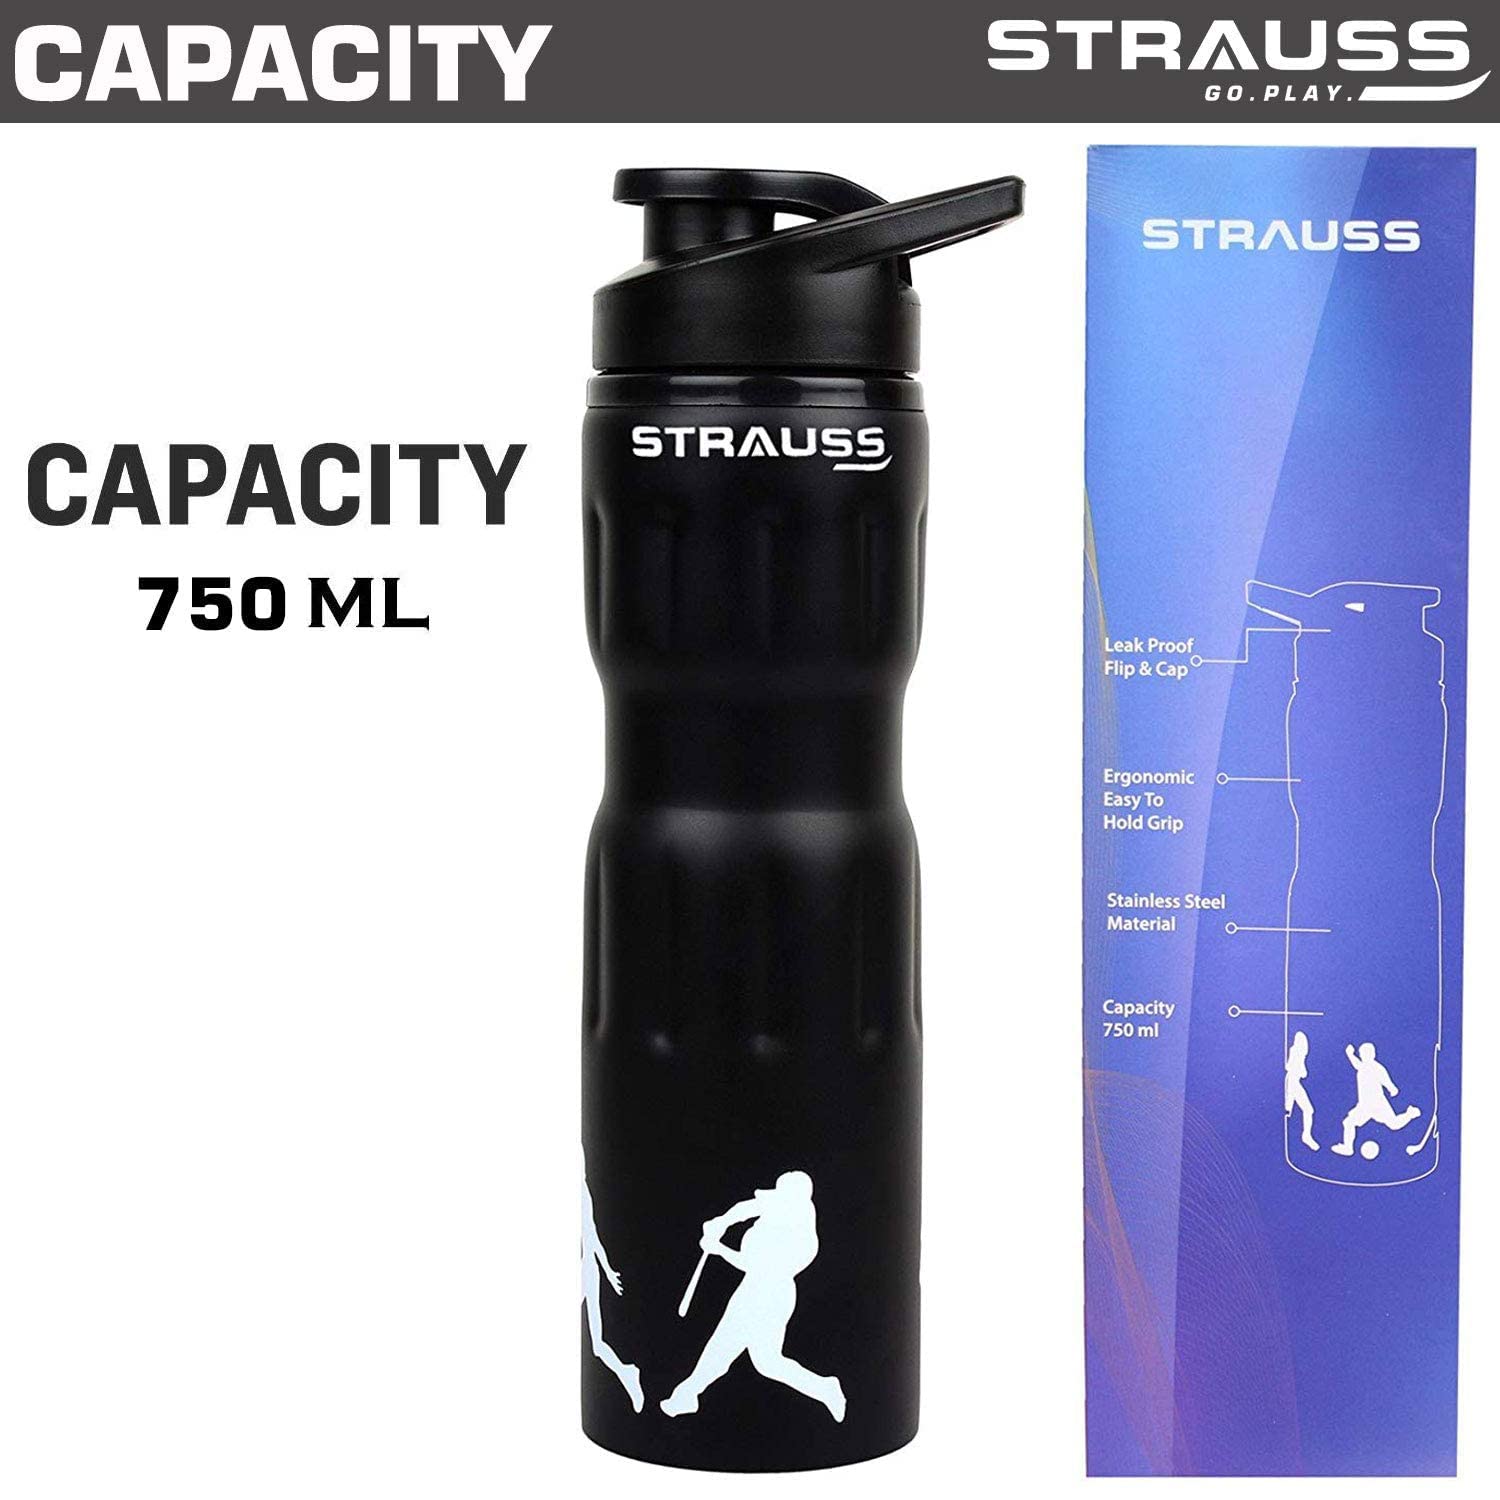 Gymreapers 128 oz Stainless Steel Water Bottle